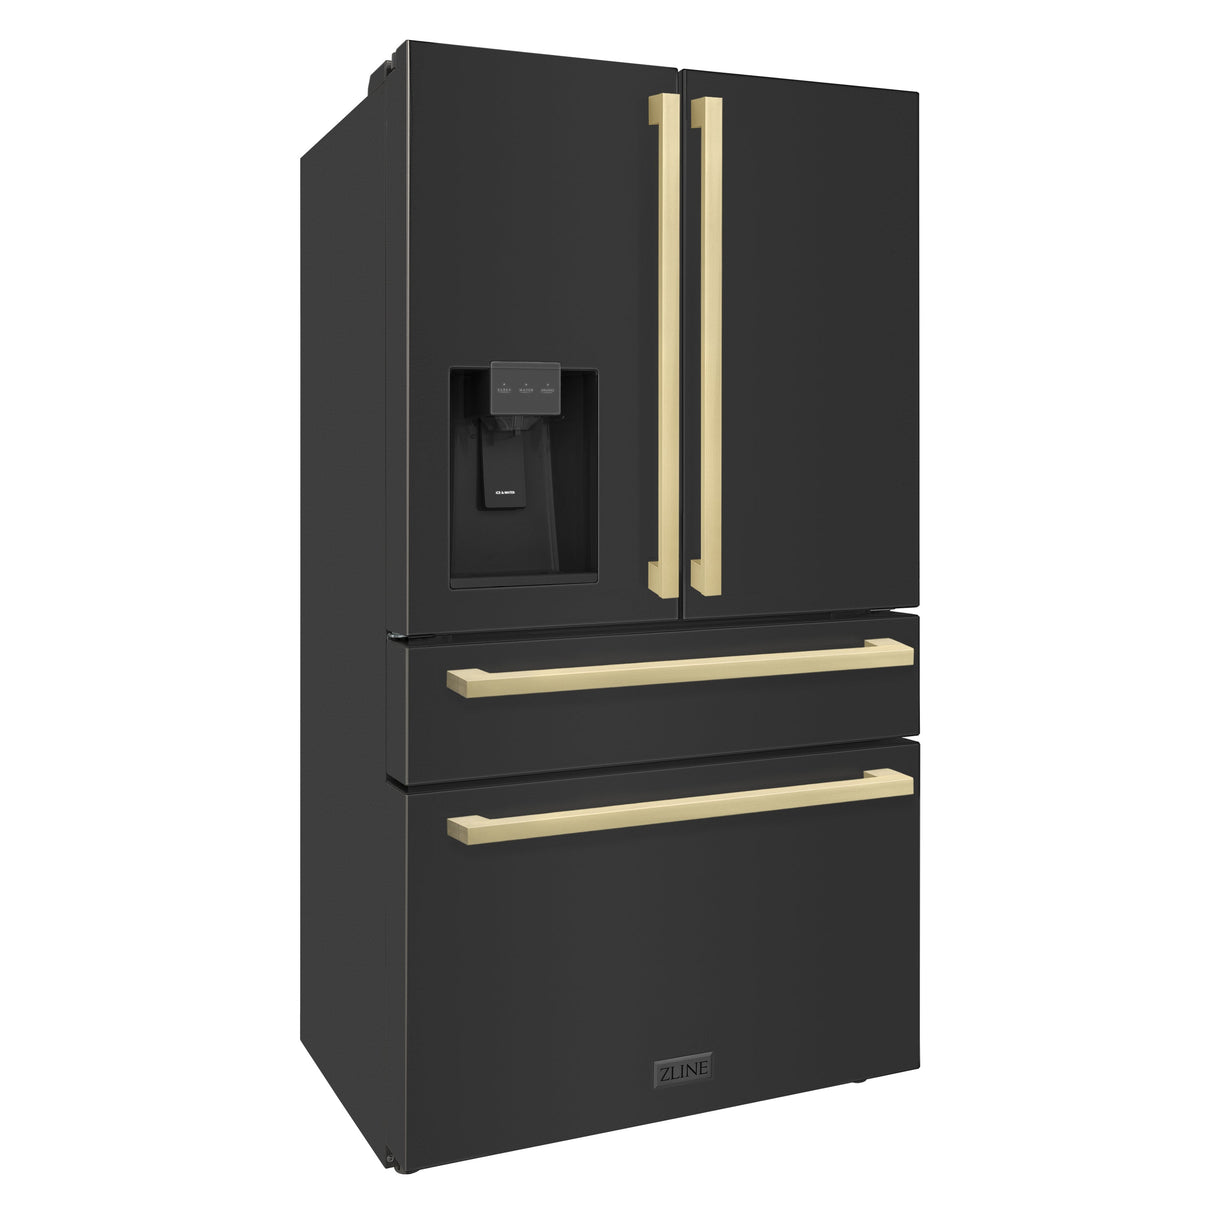 ZLINE Autograph Edition 36 in. 21.6 cu. ft 4-Door French Door Refrigerator with Water and Ice Dispenser in Black Stainless Steel with Champagne Bronze Square Handles (RFMZ-W36-BS-FCB)